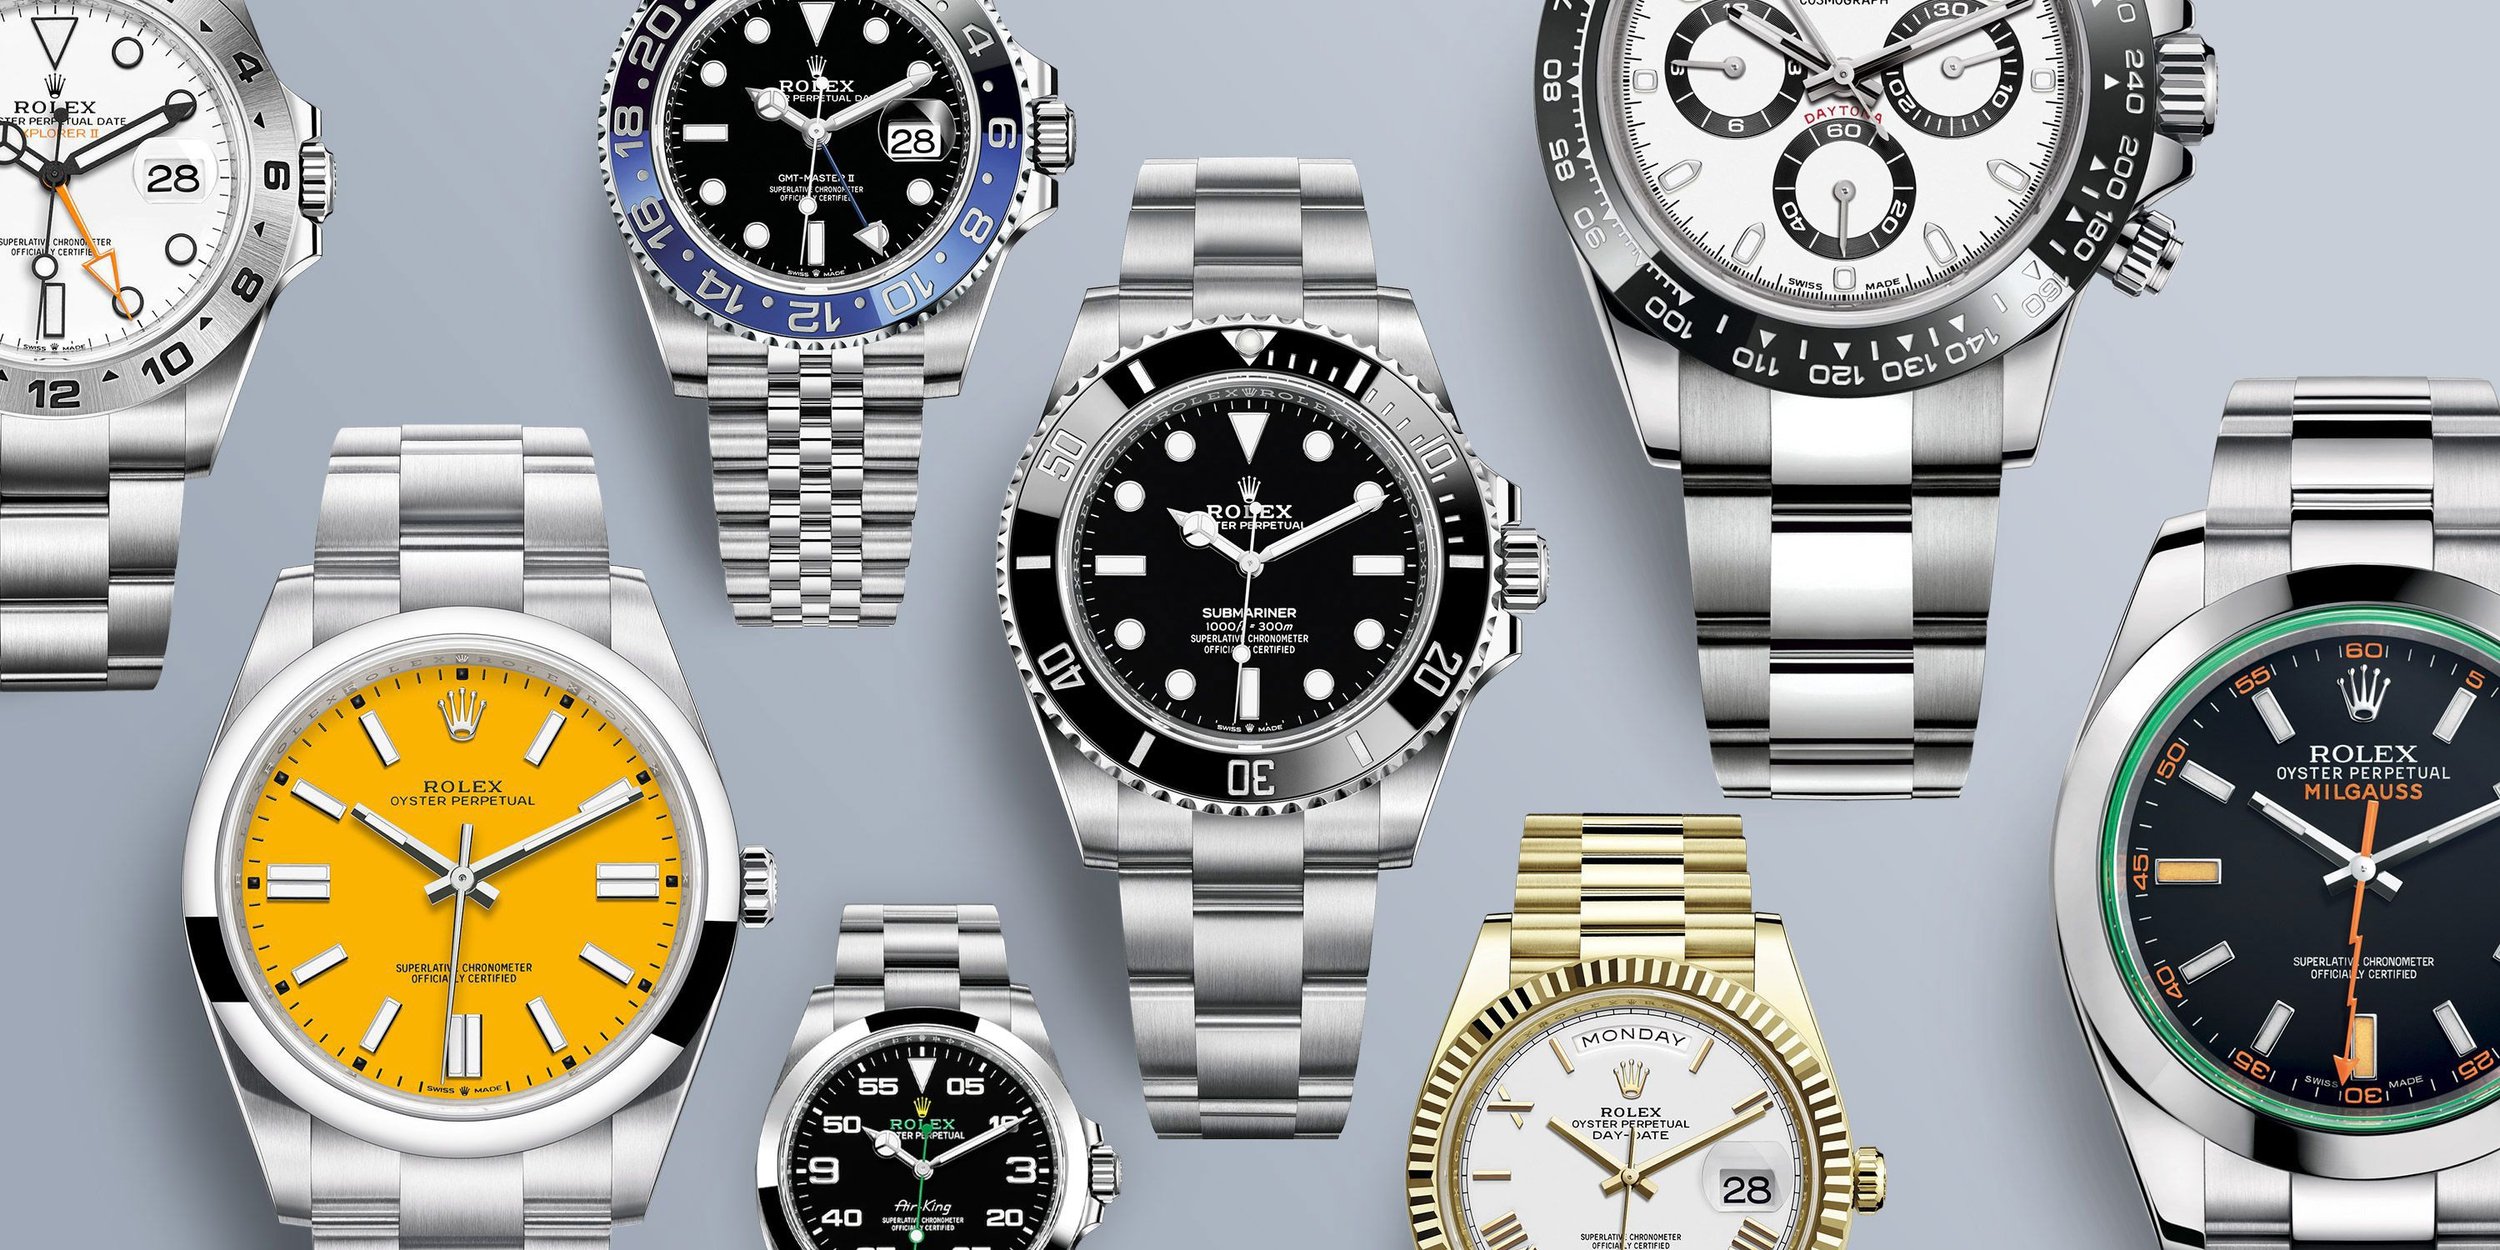 A Rolex Case How Many Watches and How Much Money Does Rolex Make? — TheWatchMuse